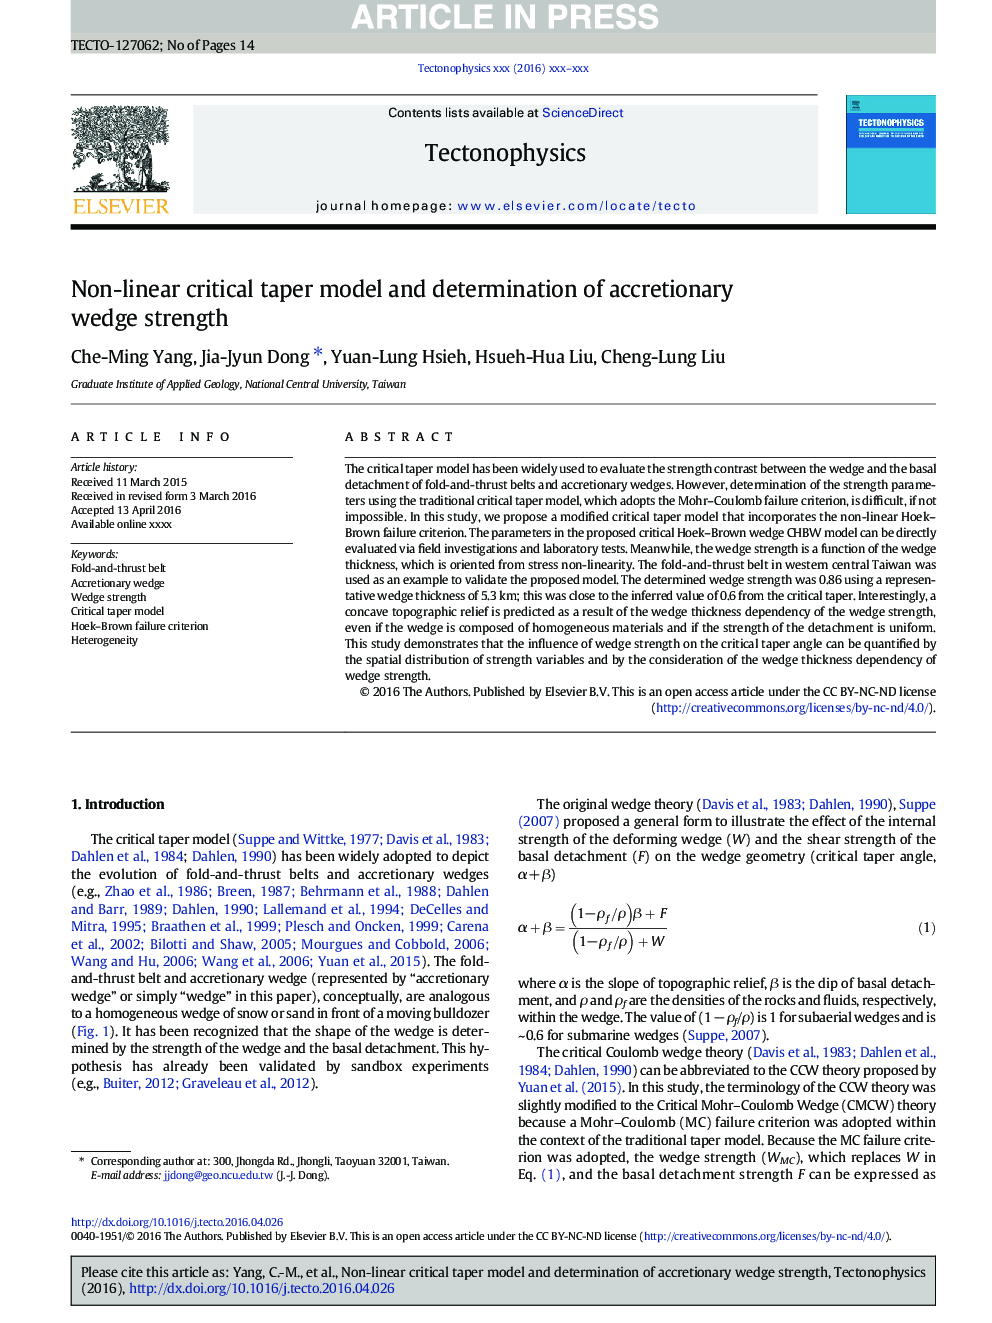 Non-linear critical taper model and determination of accretionary wedge strength